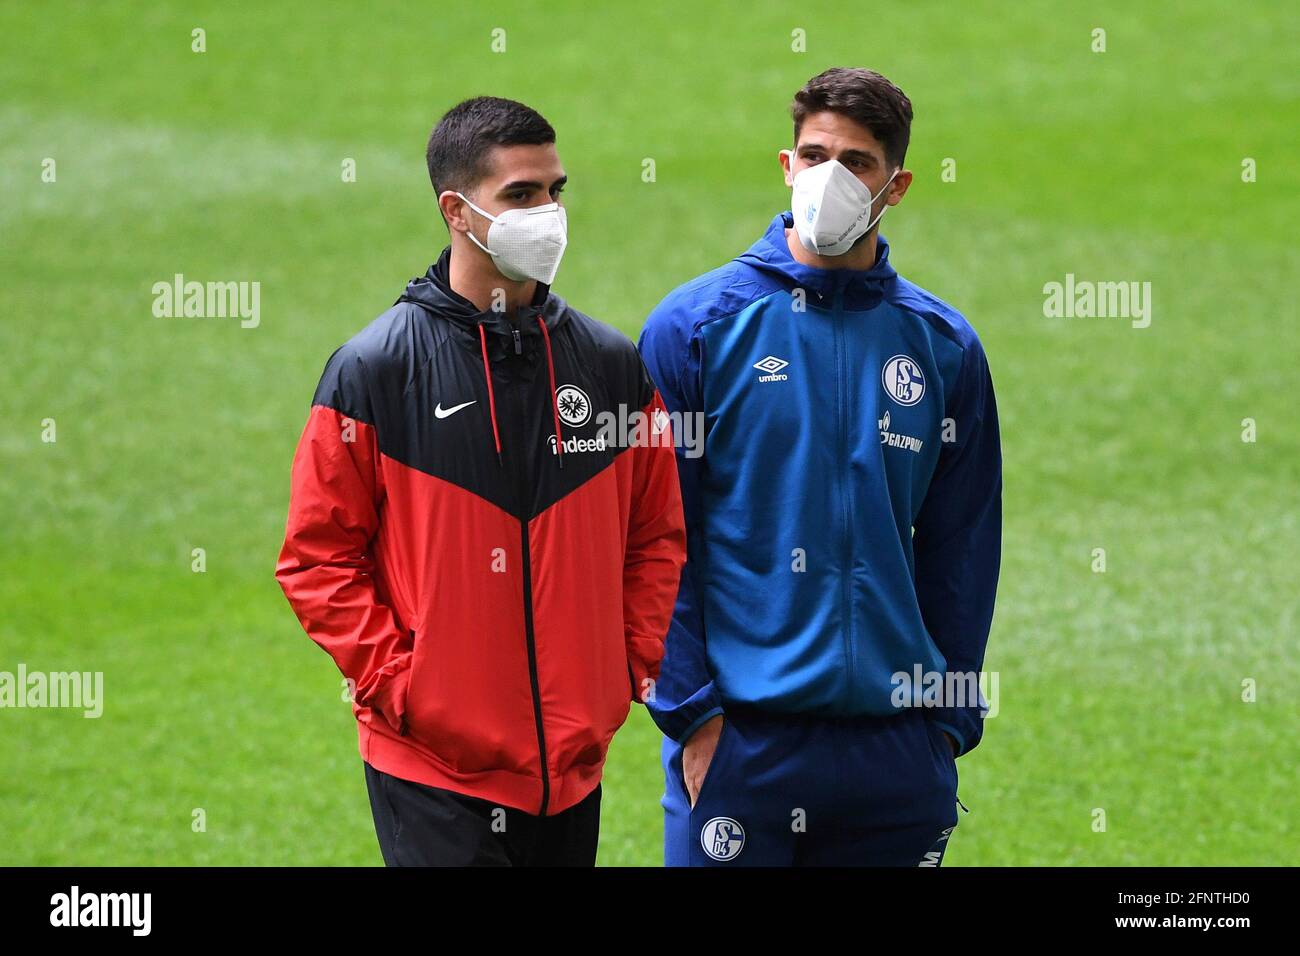 left to right Andre SILVA (F), Goncalo PACIENCIA (GE) before the game, Soccer 1. Bundesliga, 33rd matchday, FC Schalke 04 (GE) - Eintracht Frankfurt (F) 4: 3, on May 15, 2021 in Gelsenkirchen/Germany. # DFL regulations prohibit any use of photographs as image sequences and/or quasi-video ¬ Stock Photo